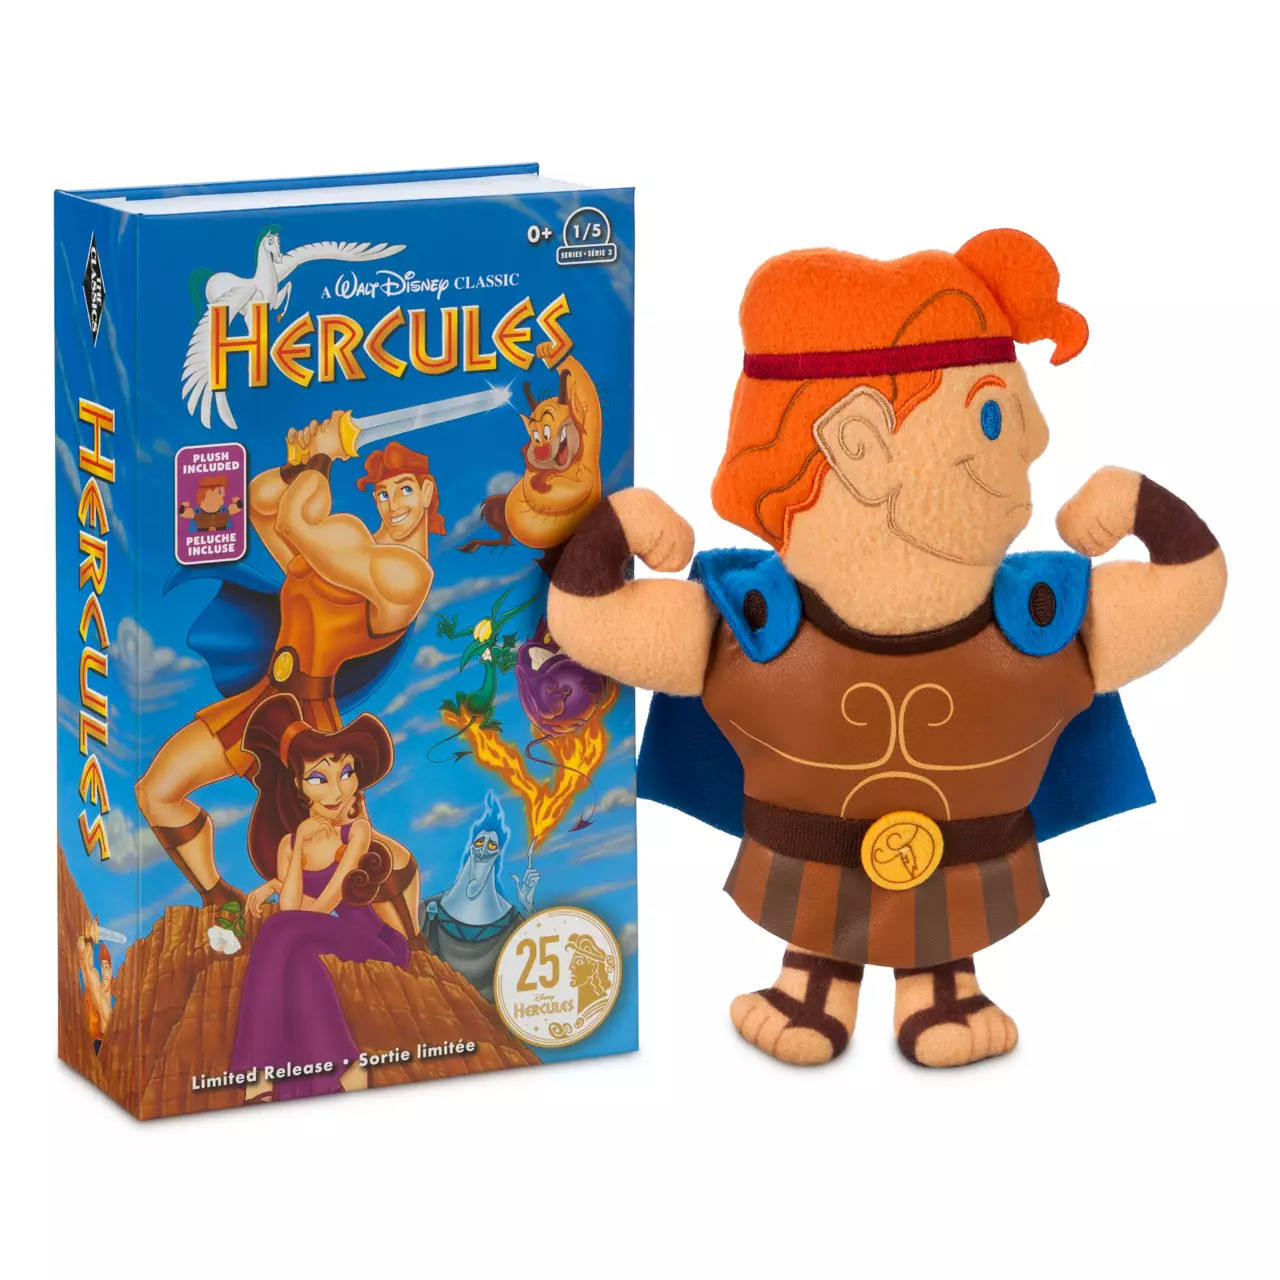 The Disney Store Hercules VHS Plush Small Toy – Series 3 1/5 Limited Release New